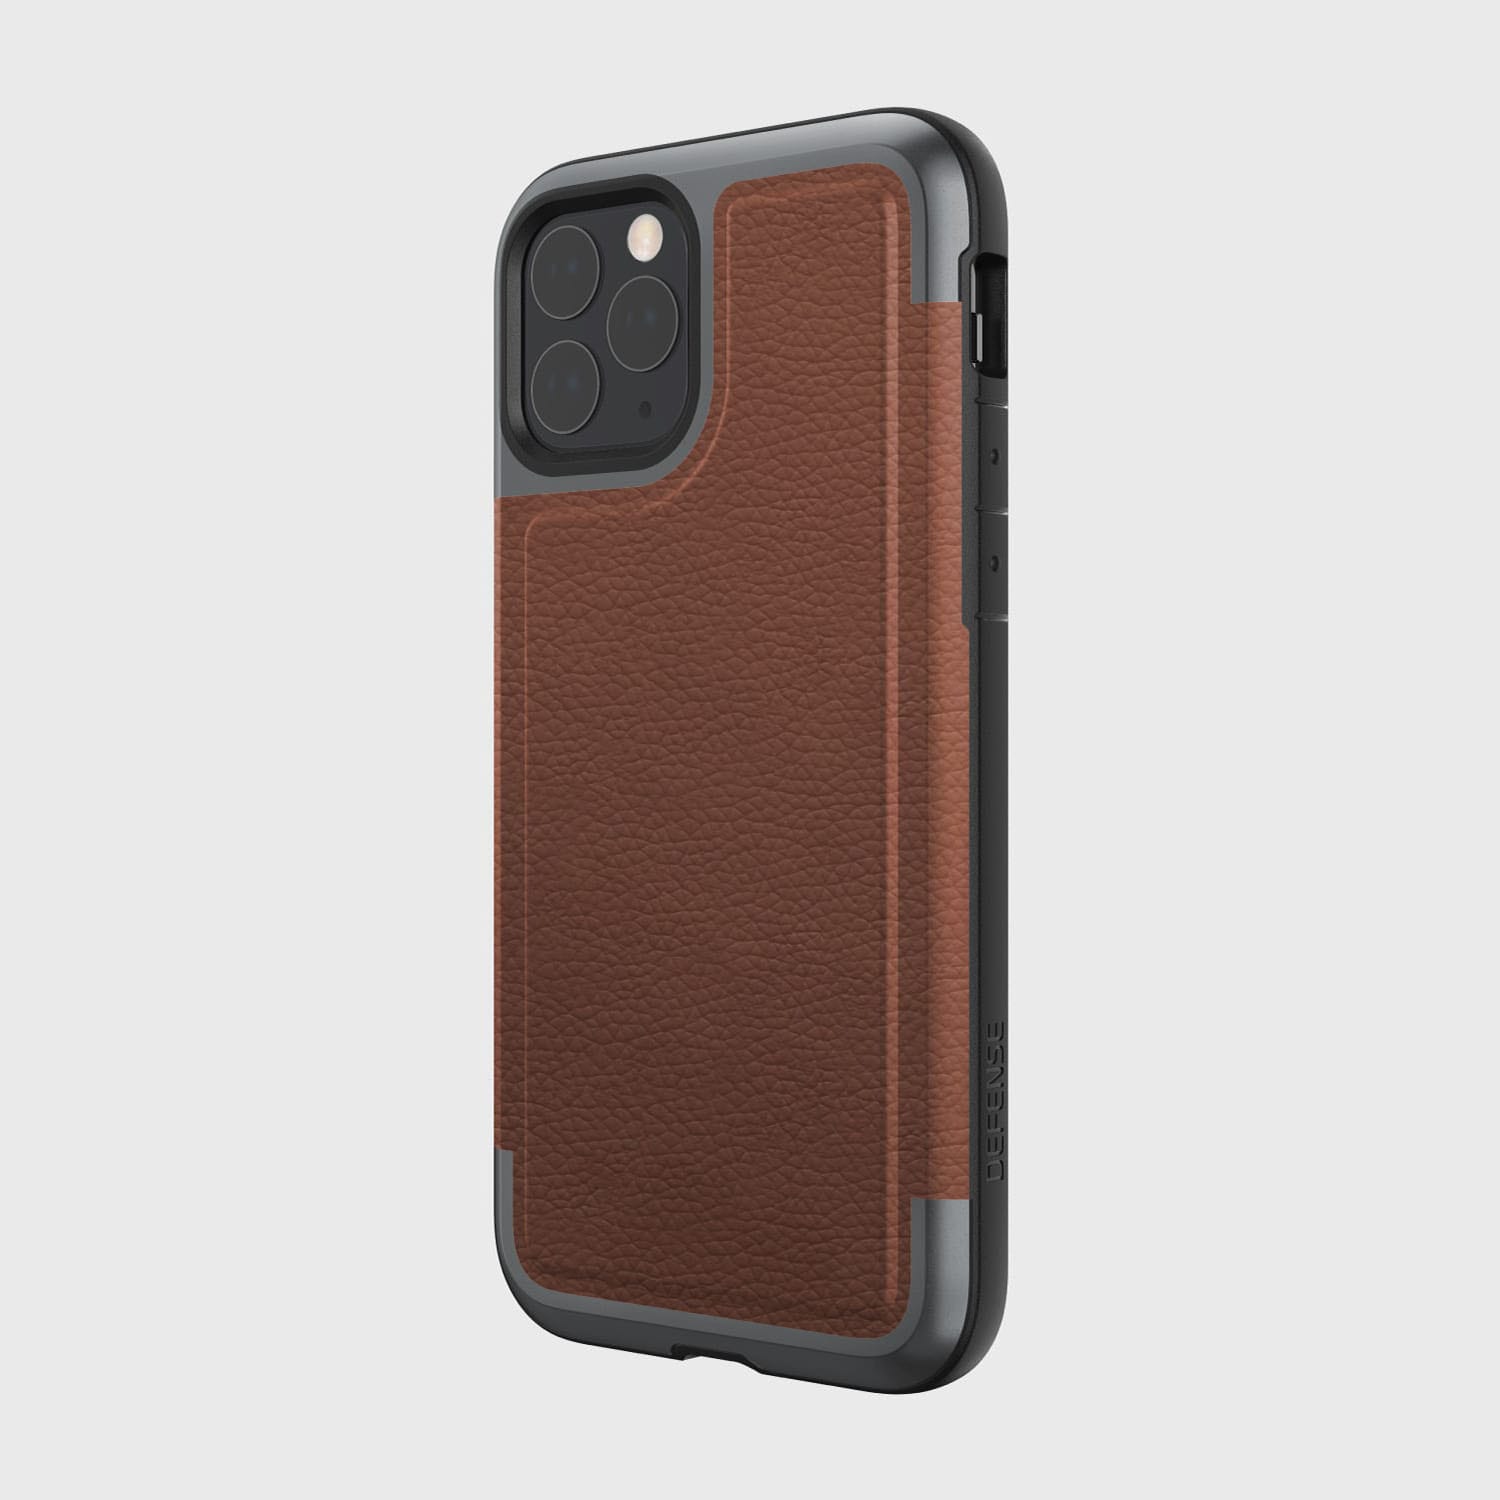 A brown leather protective case for iPhone 11 Pro with drop protection - the iPhone 11 Pro Case - Prime by Raptic.